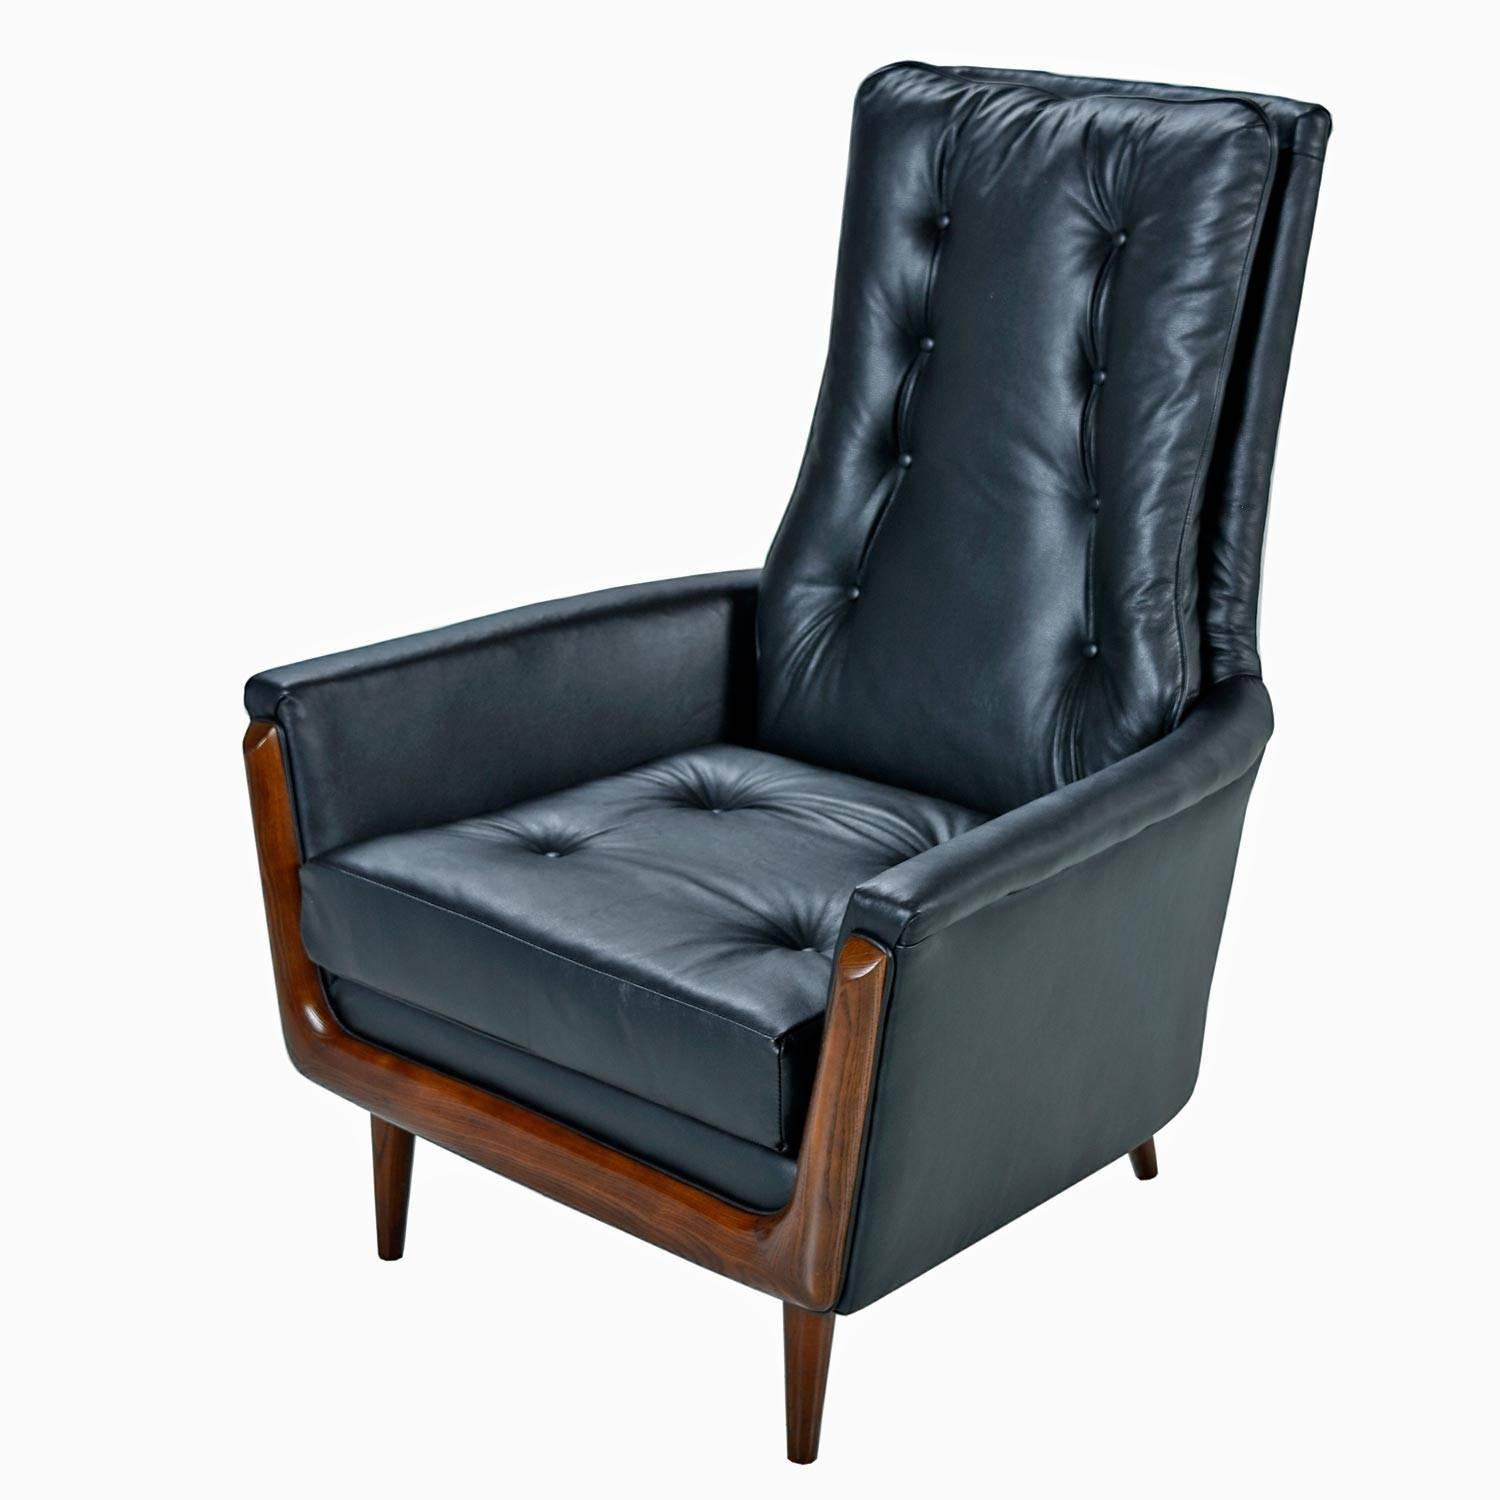 Scandinavian Modern Restored Adrian Pearsall Style Black Leather High Back Tufted Lounge Chair